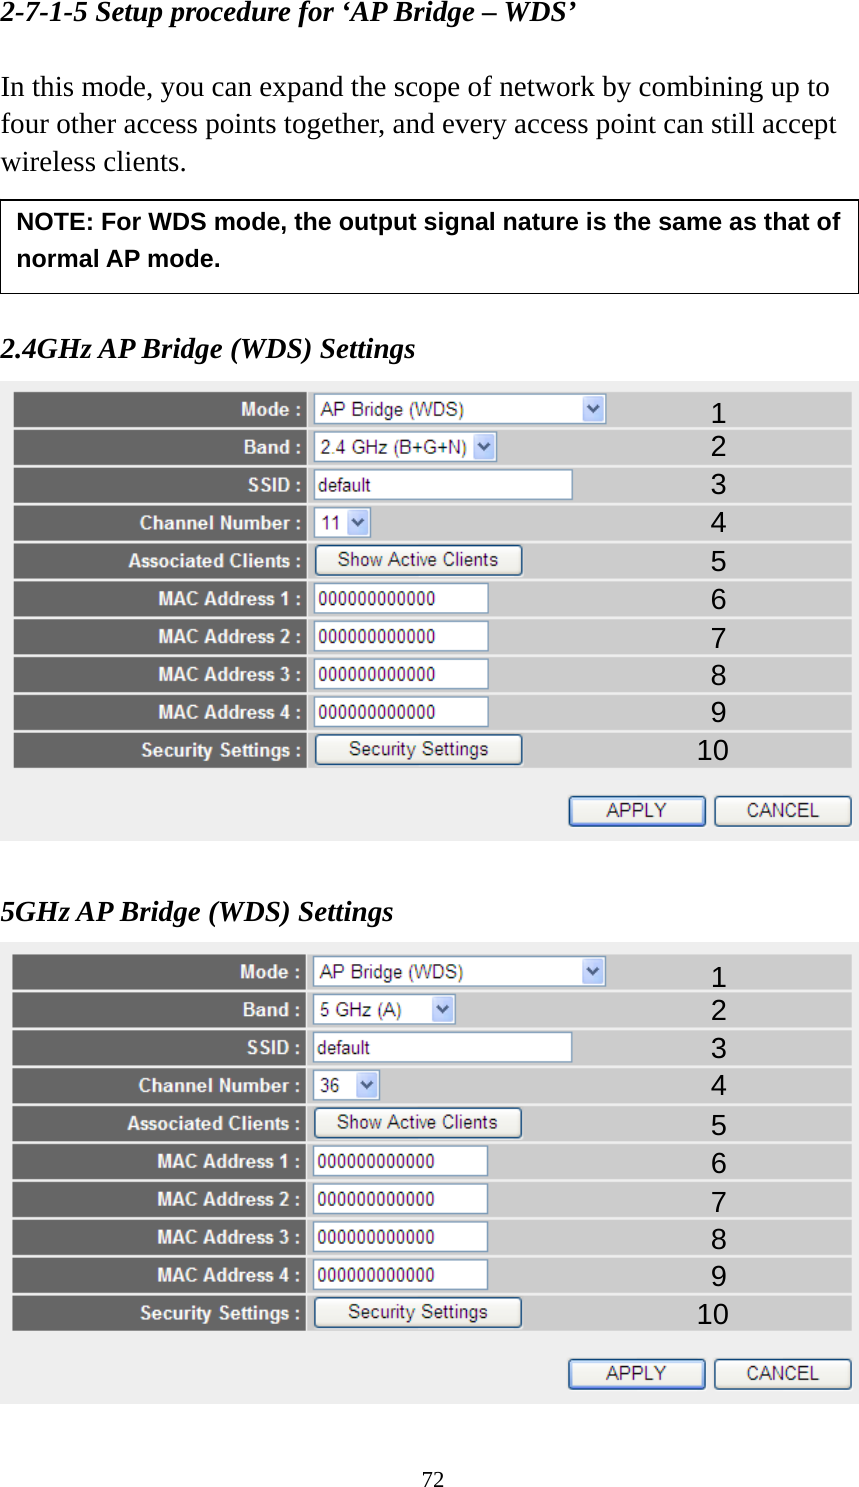 72 2-7-1-5 Setup procedure for ‘AP Bridge – WDS’  In this mode, you can expand the scope of network by combining up to four other access points together, and every access point can still accept wireless clients.     2.4GHz AP Bridge (WDS) Settings   5GHz AP Bridge (WDS) Settings  1 2 3 4 5 7 8 6 9 10 NOTE: For WDS mode, the output signal nature is the same as that of normal AP mode. 1 2 3 4 5 7 8 6 9 10 